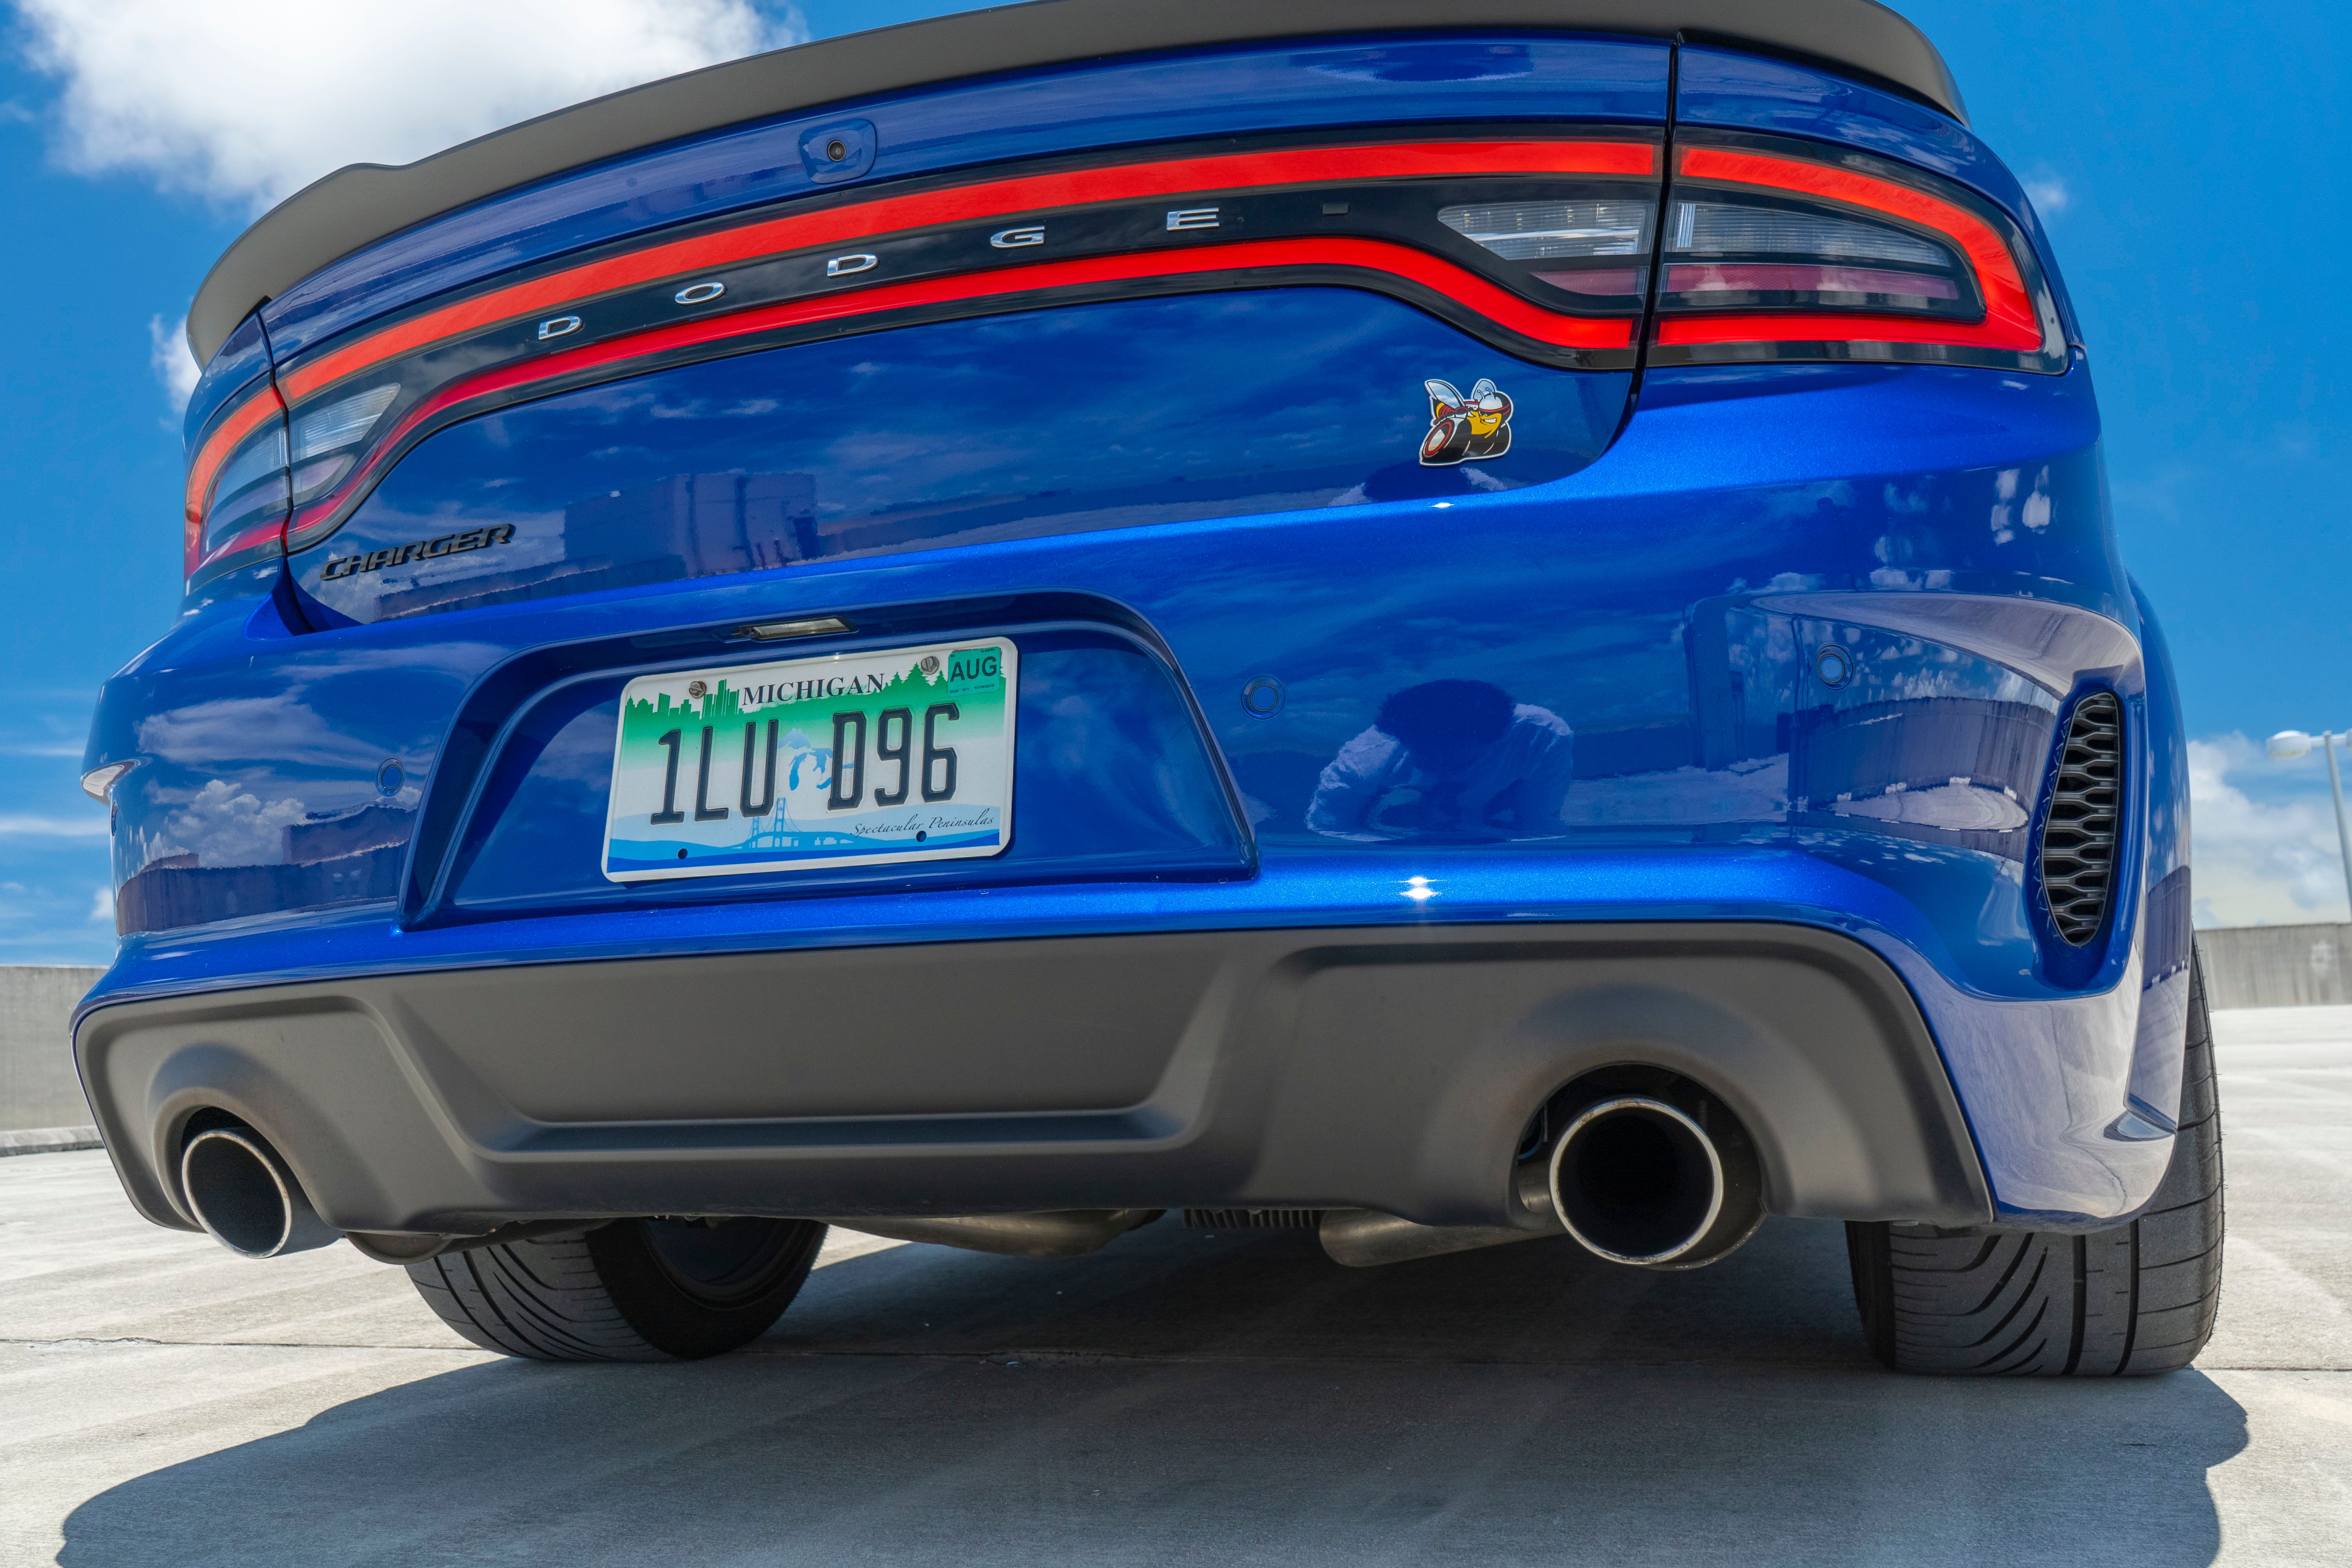 2020 Dodge Charger 392 Scat Pack Widebody - Driven